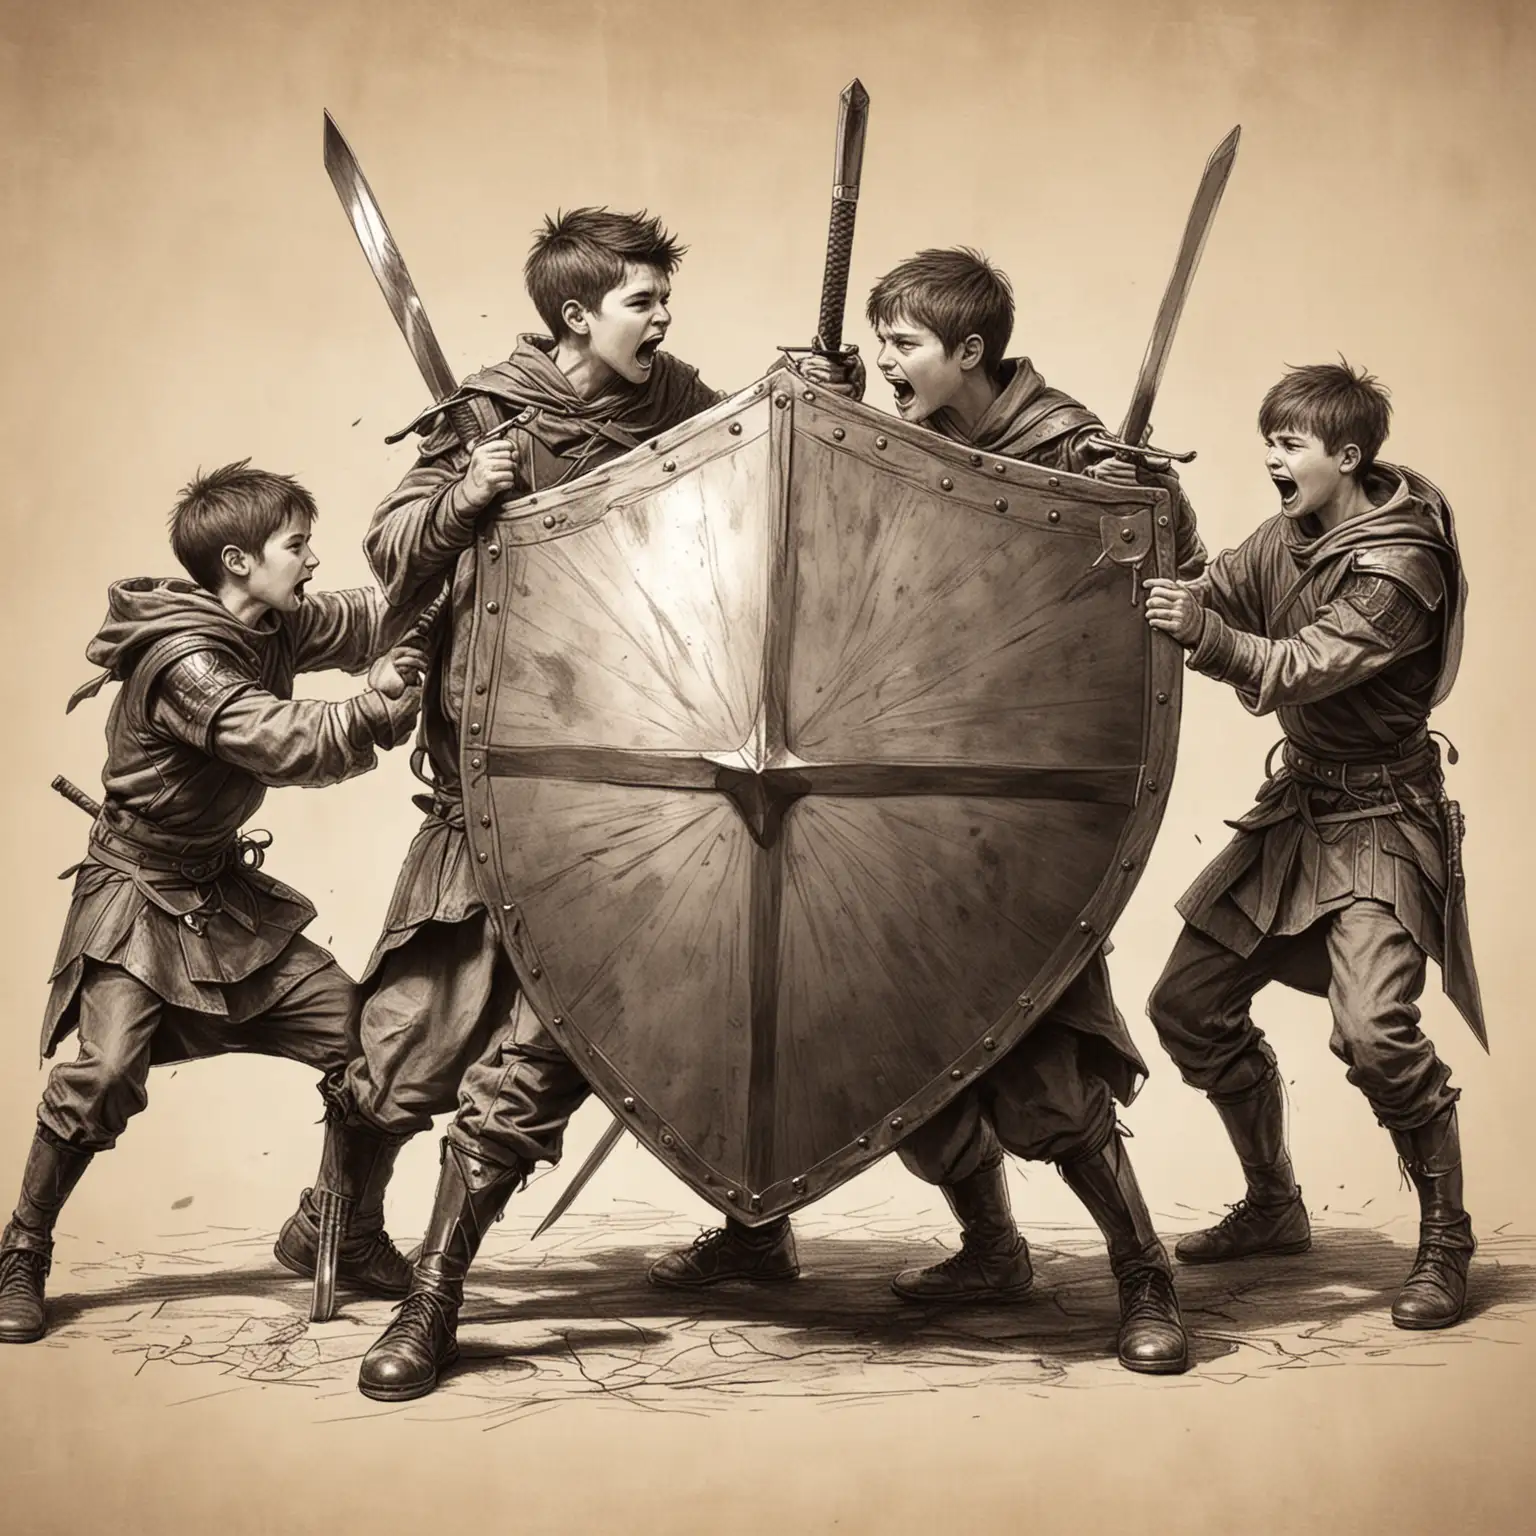 Boys Dueling with Swords and Shields Sketch